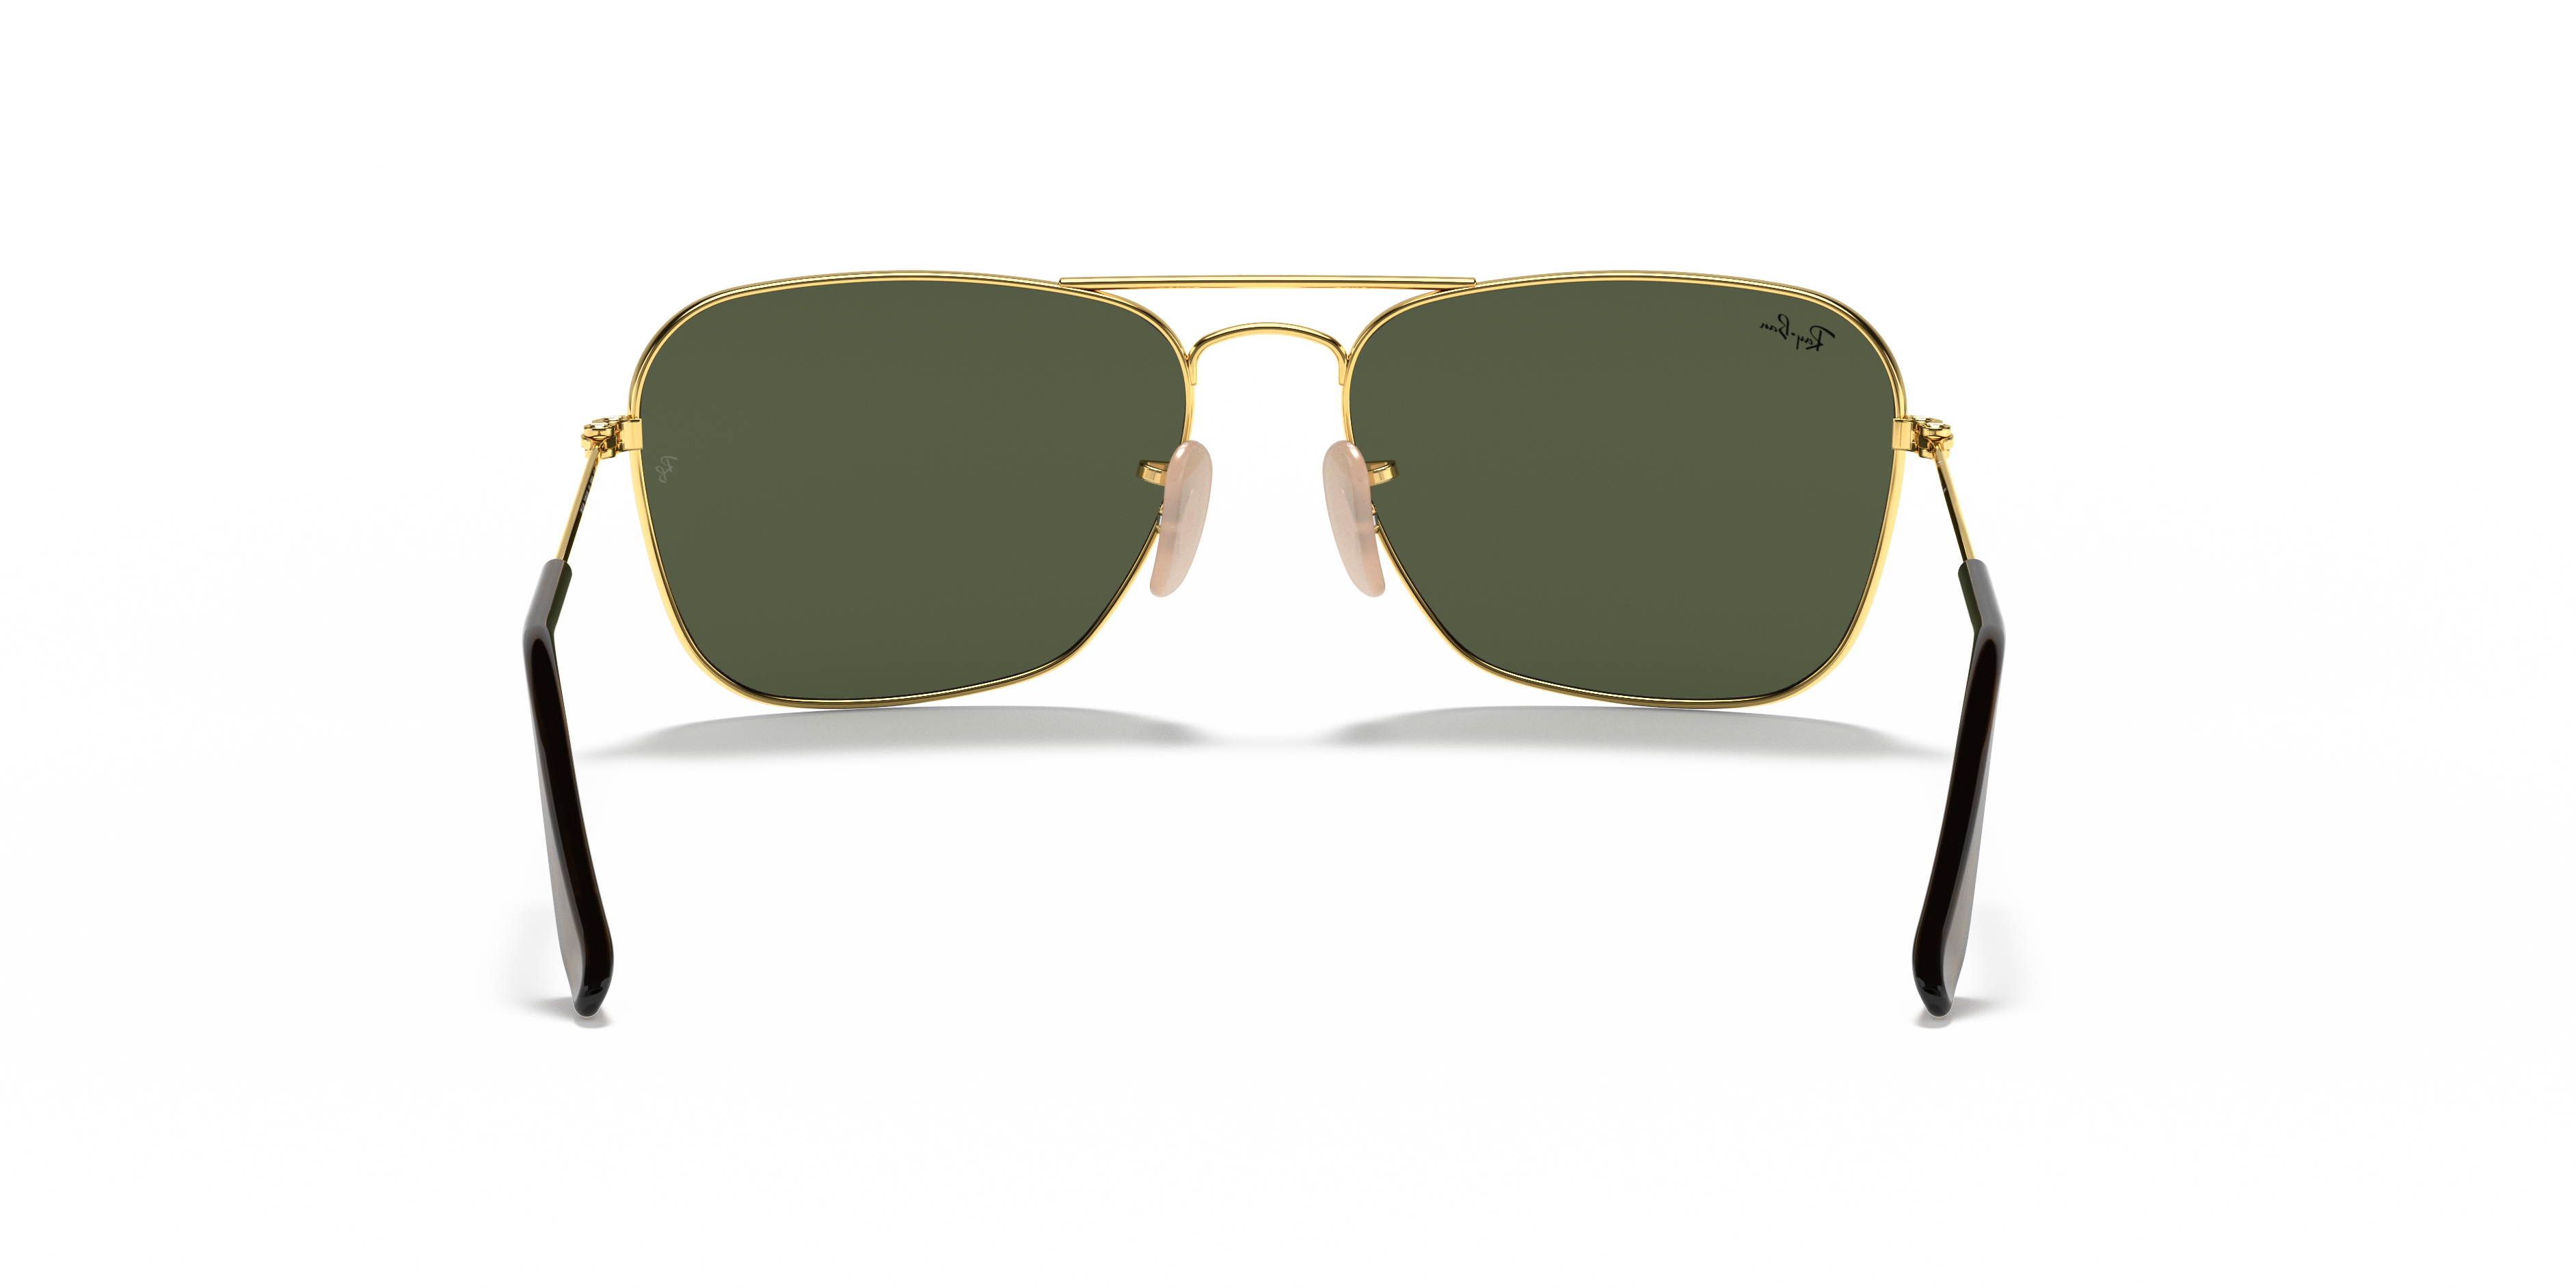 Gold Ray-Ban Rb3136 Caravan Square Sunglasses in Gold Womens Sunglasses Ray-Ban Sunglasses Black 